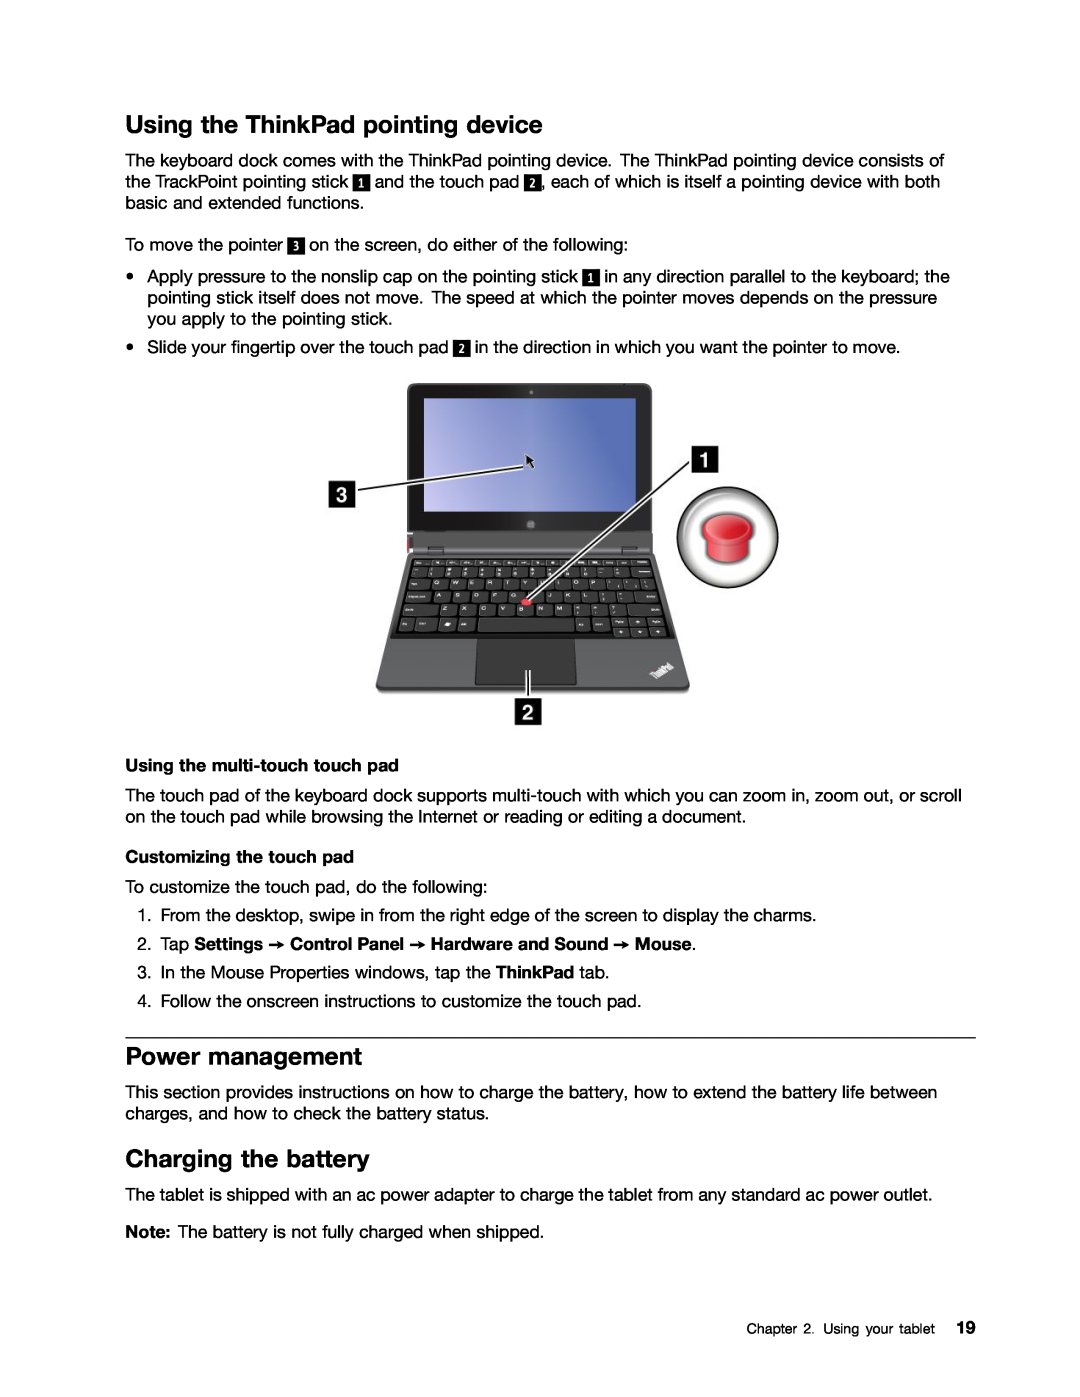 Lenovo 370133U Using the ThinkPad pointing device, Power management, Charging the battery, Using the multi-touchtouch pad 